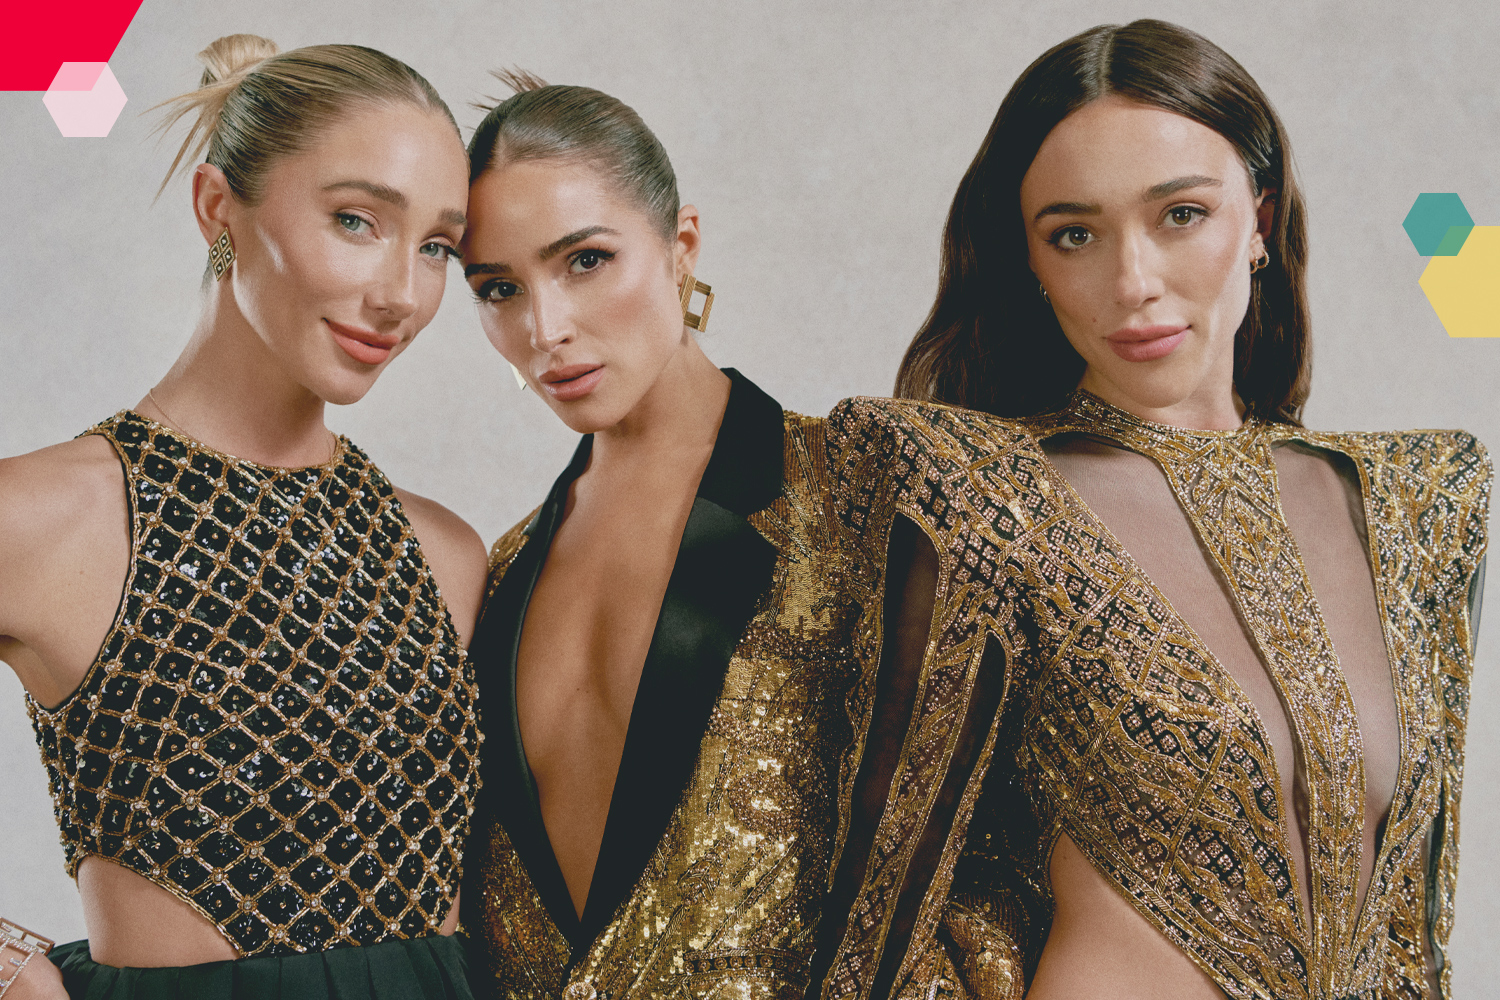 Olivia, Aurora and Sophia Culpo photographed for the People Digital Stylewatch Issue November 2022